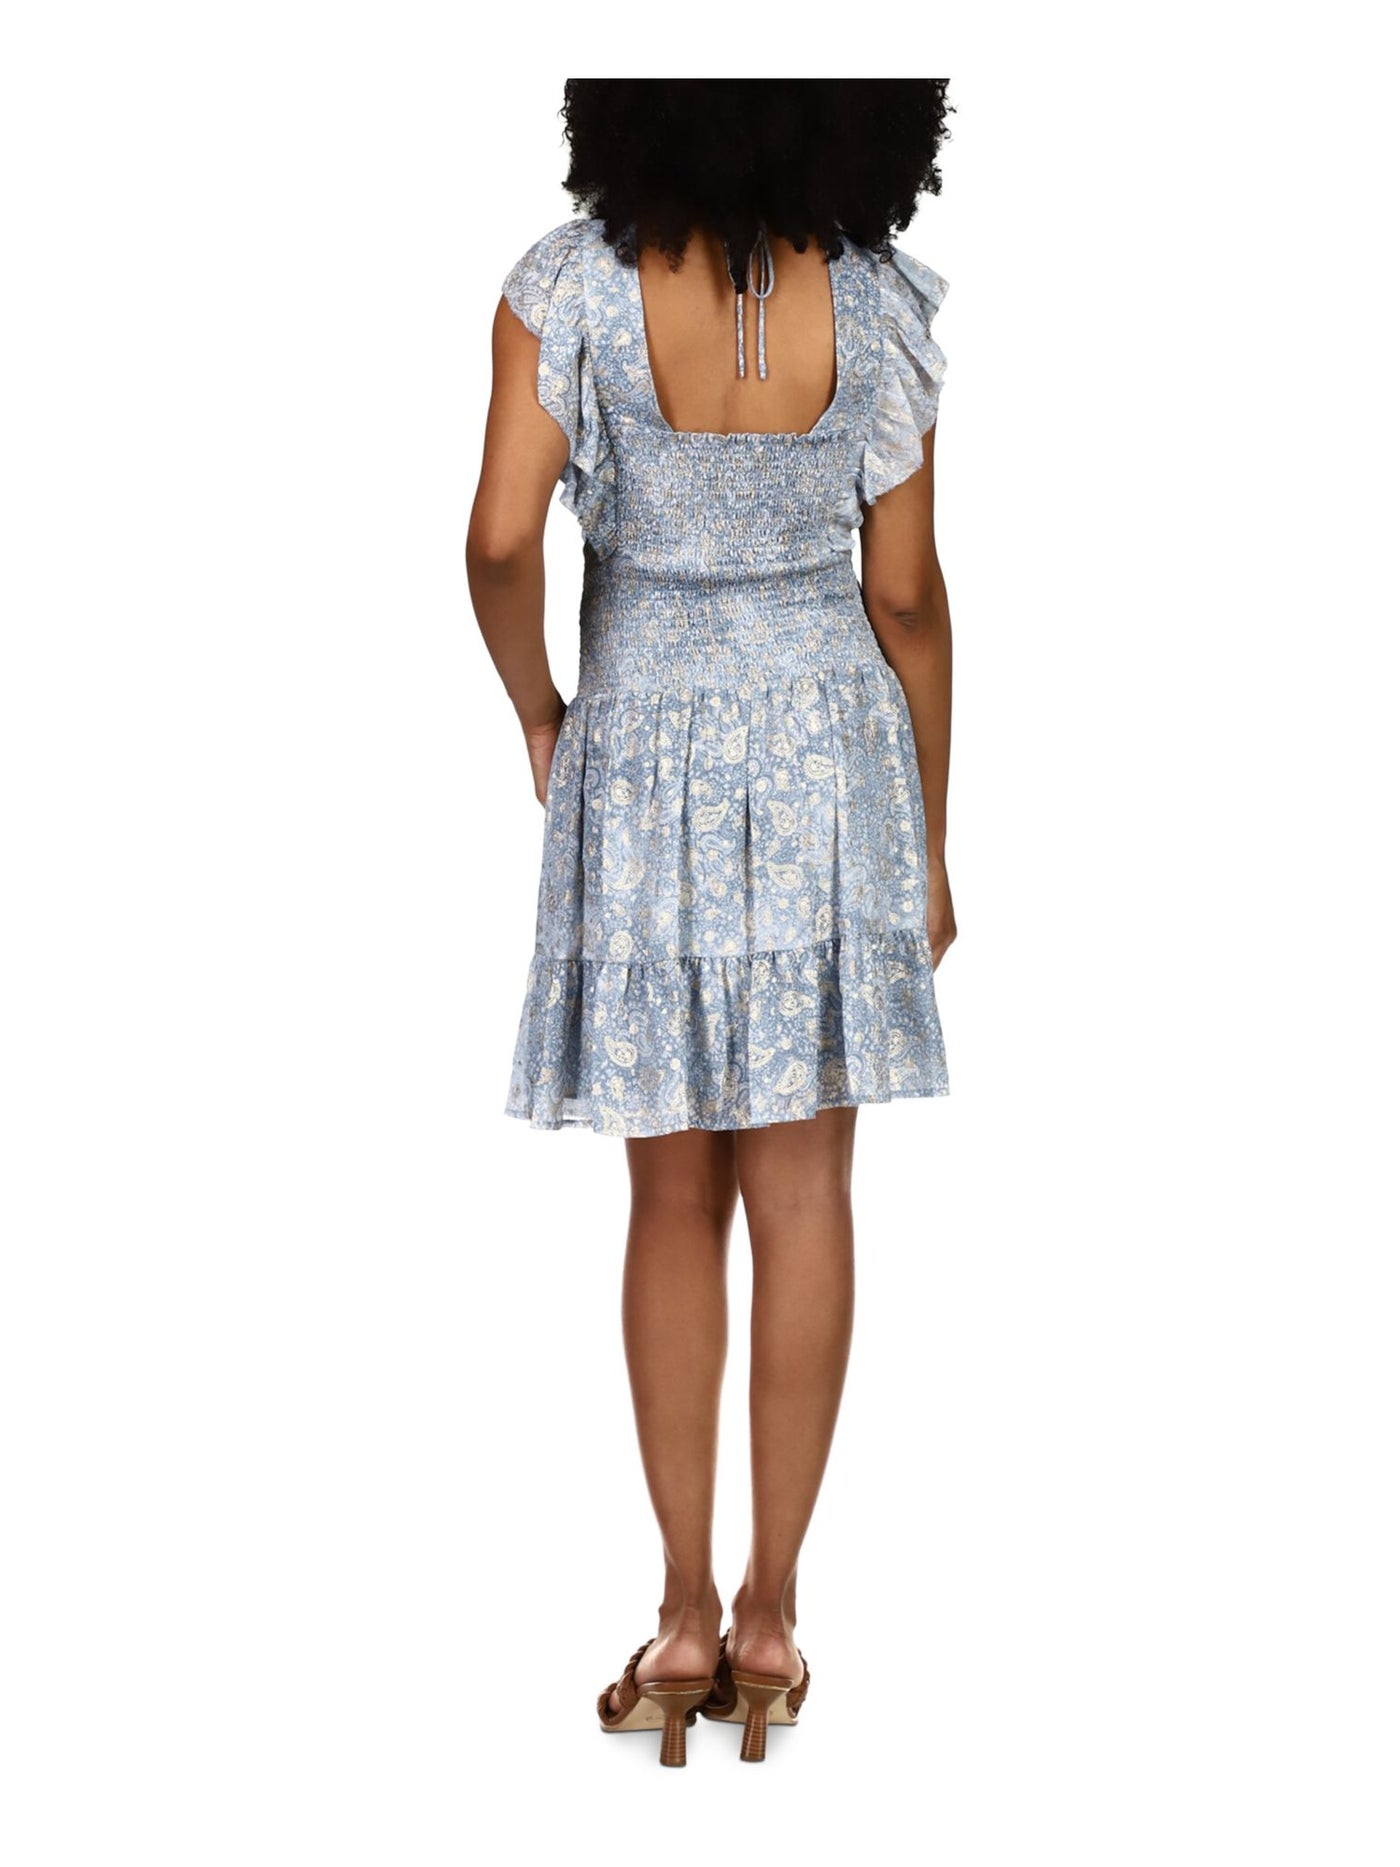 MICHAEL KORS Womens Light Blue Smocked Ruffled Tie Square Open Back Lined Printed Flutter Sleeve Round Neck Short Party Fit + Flare Dress Petites S